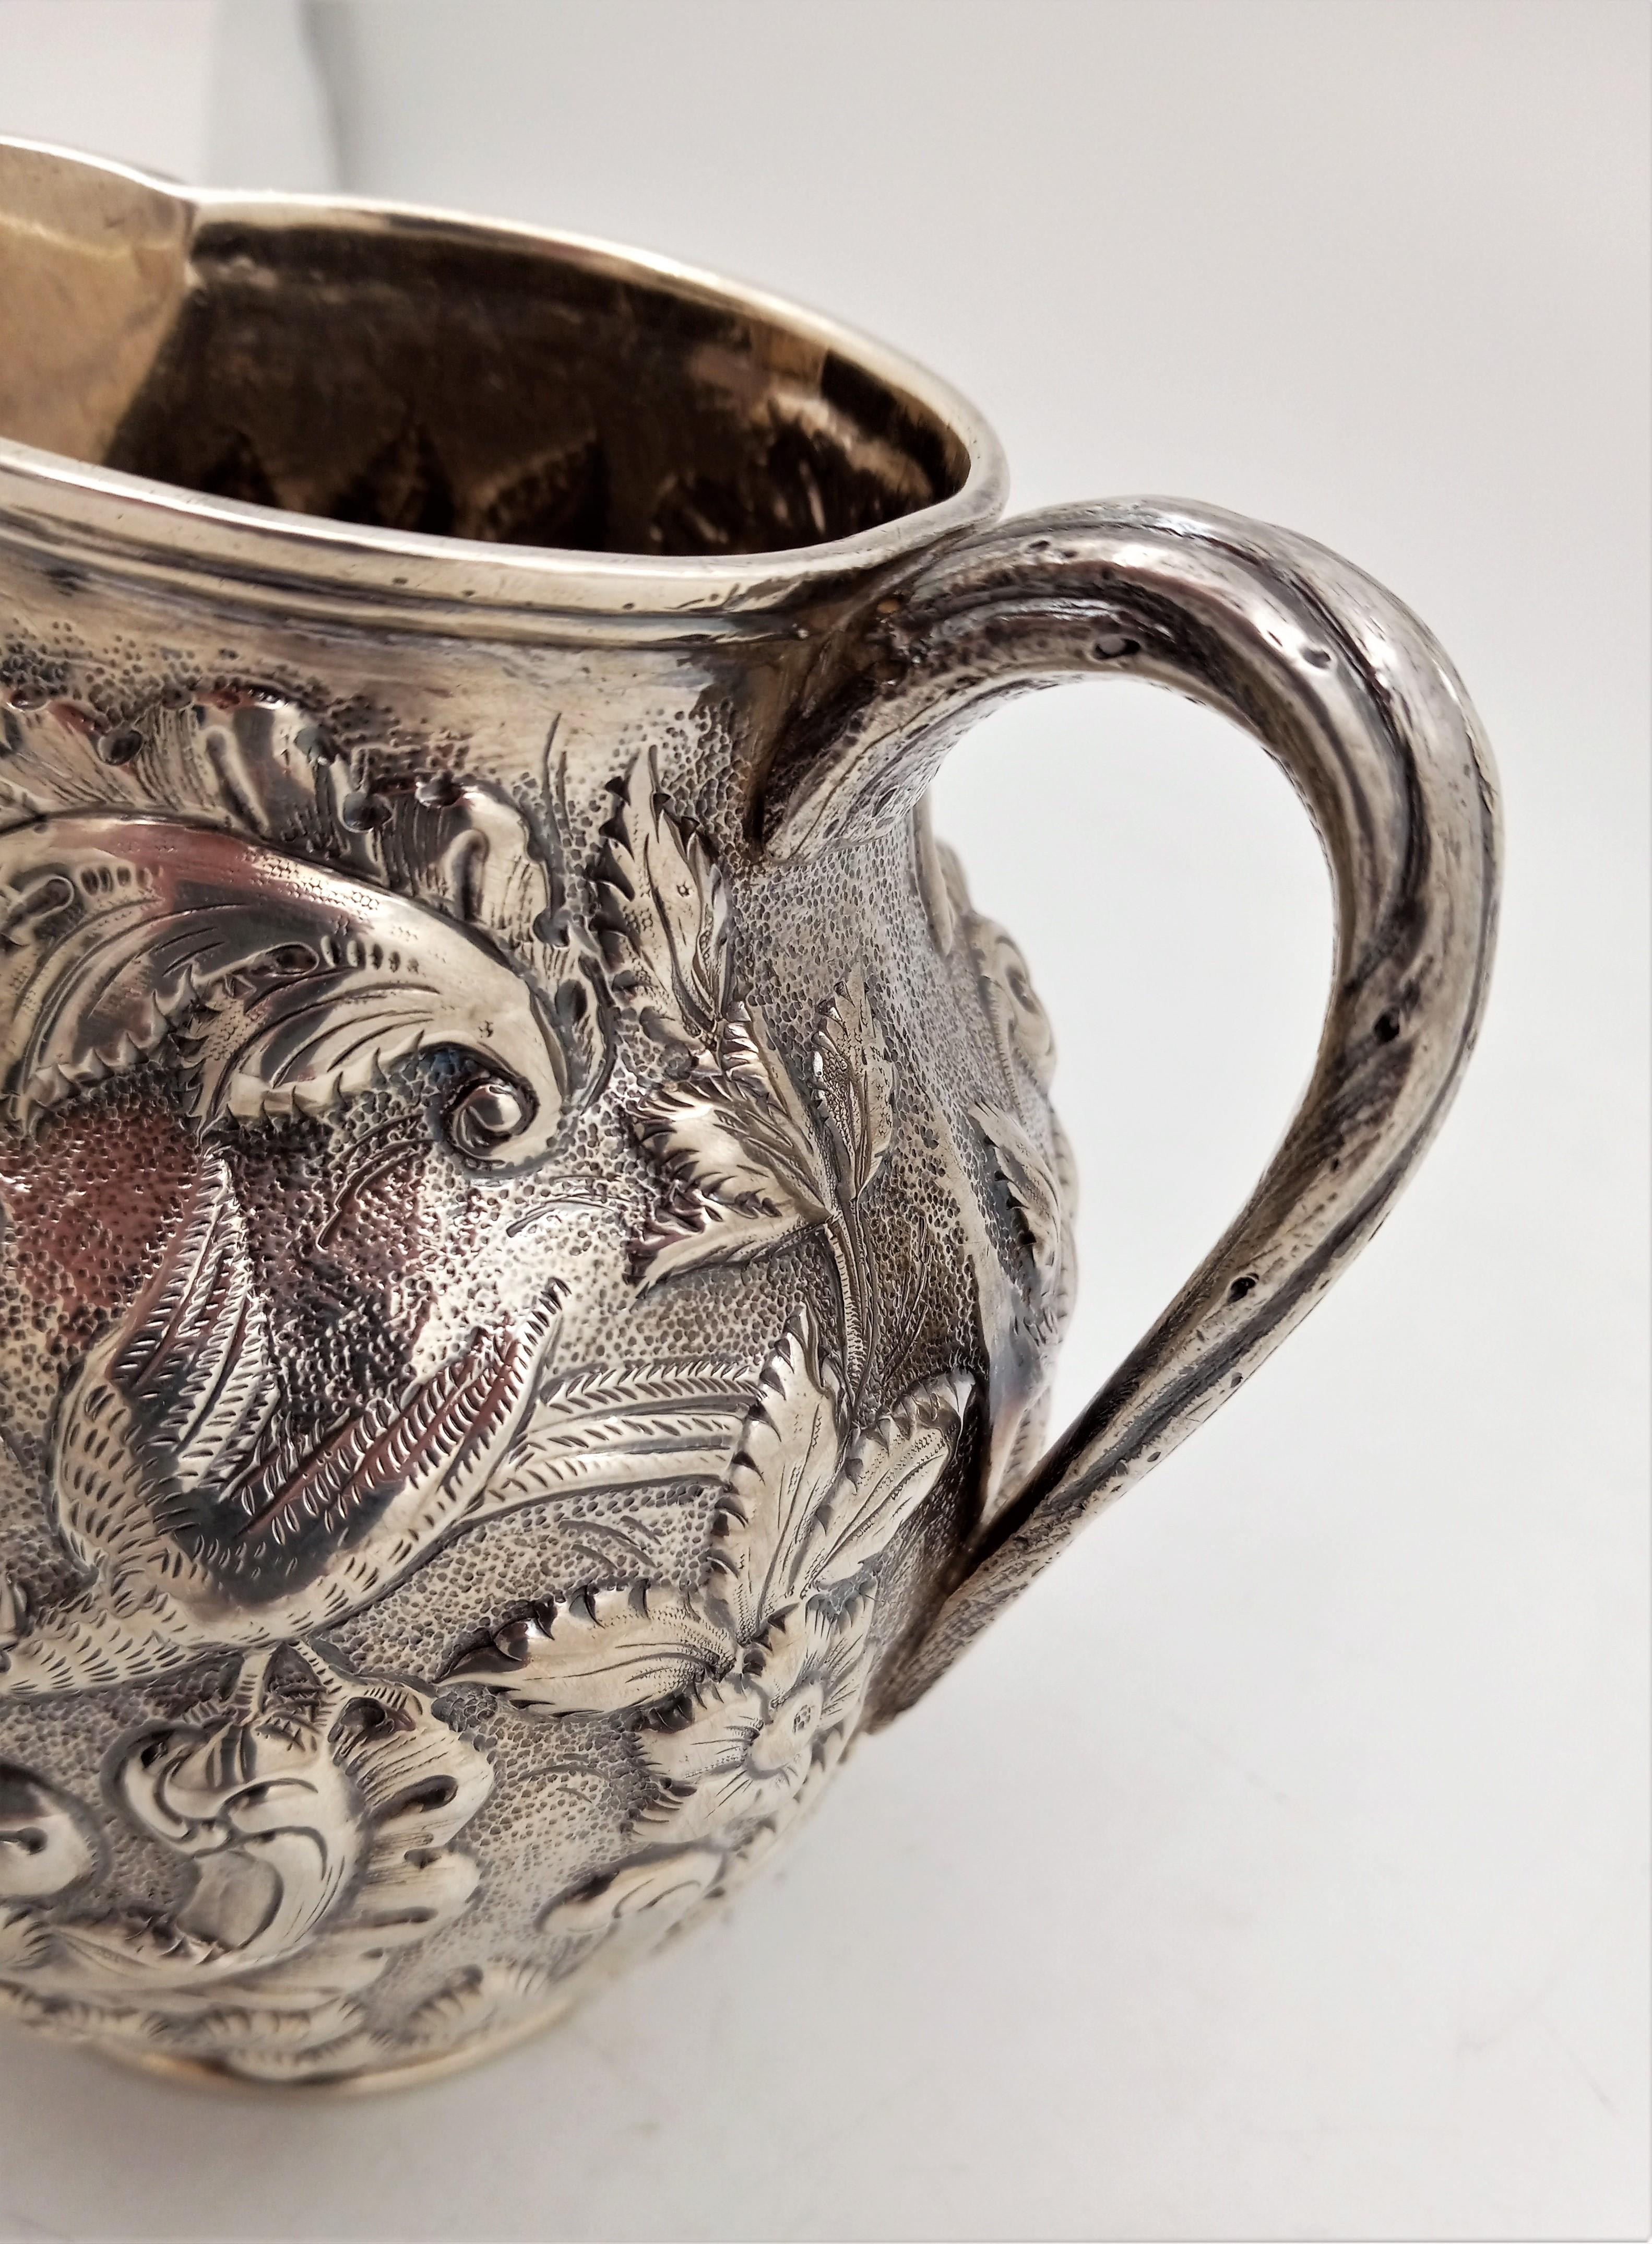 Hand-Crafted Geo. W. Webb & Co. Hand-Chased Coin Silver Aesthetic Repousse Pitcher, c. 1875